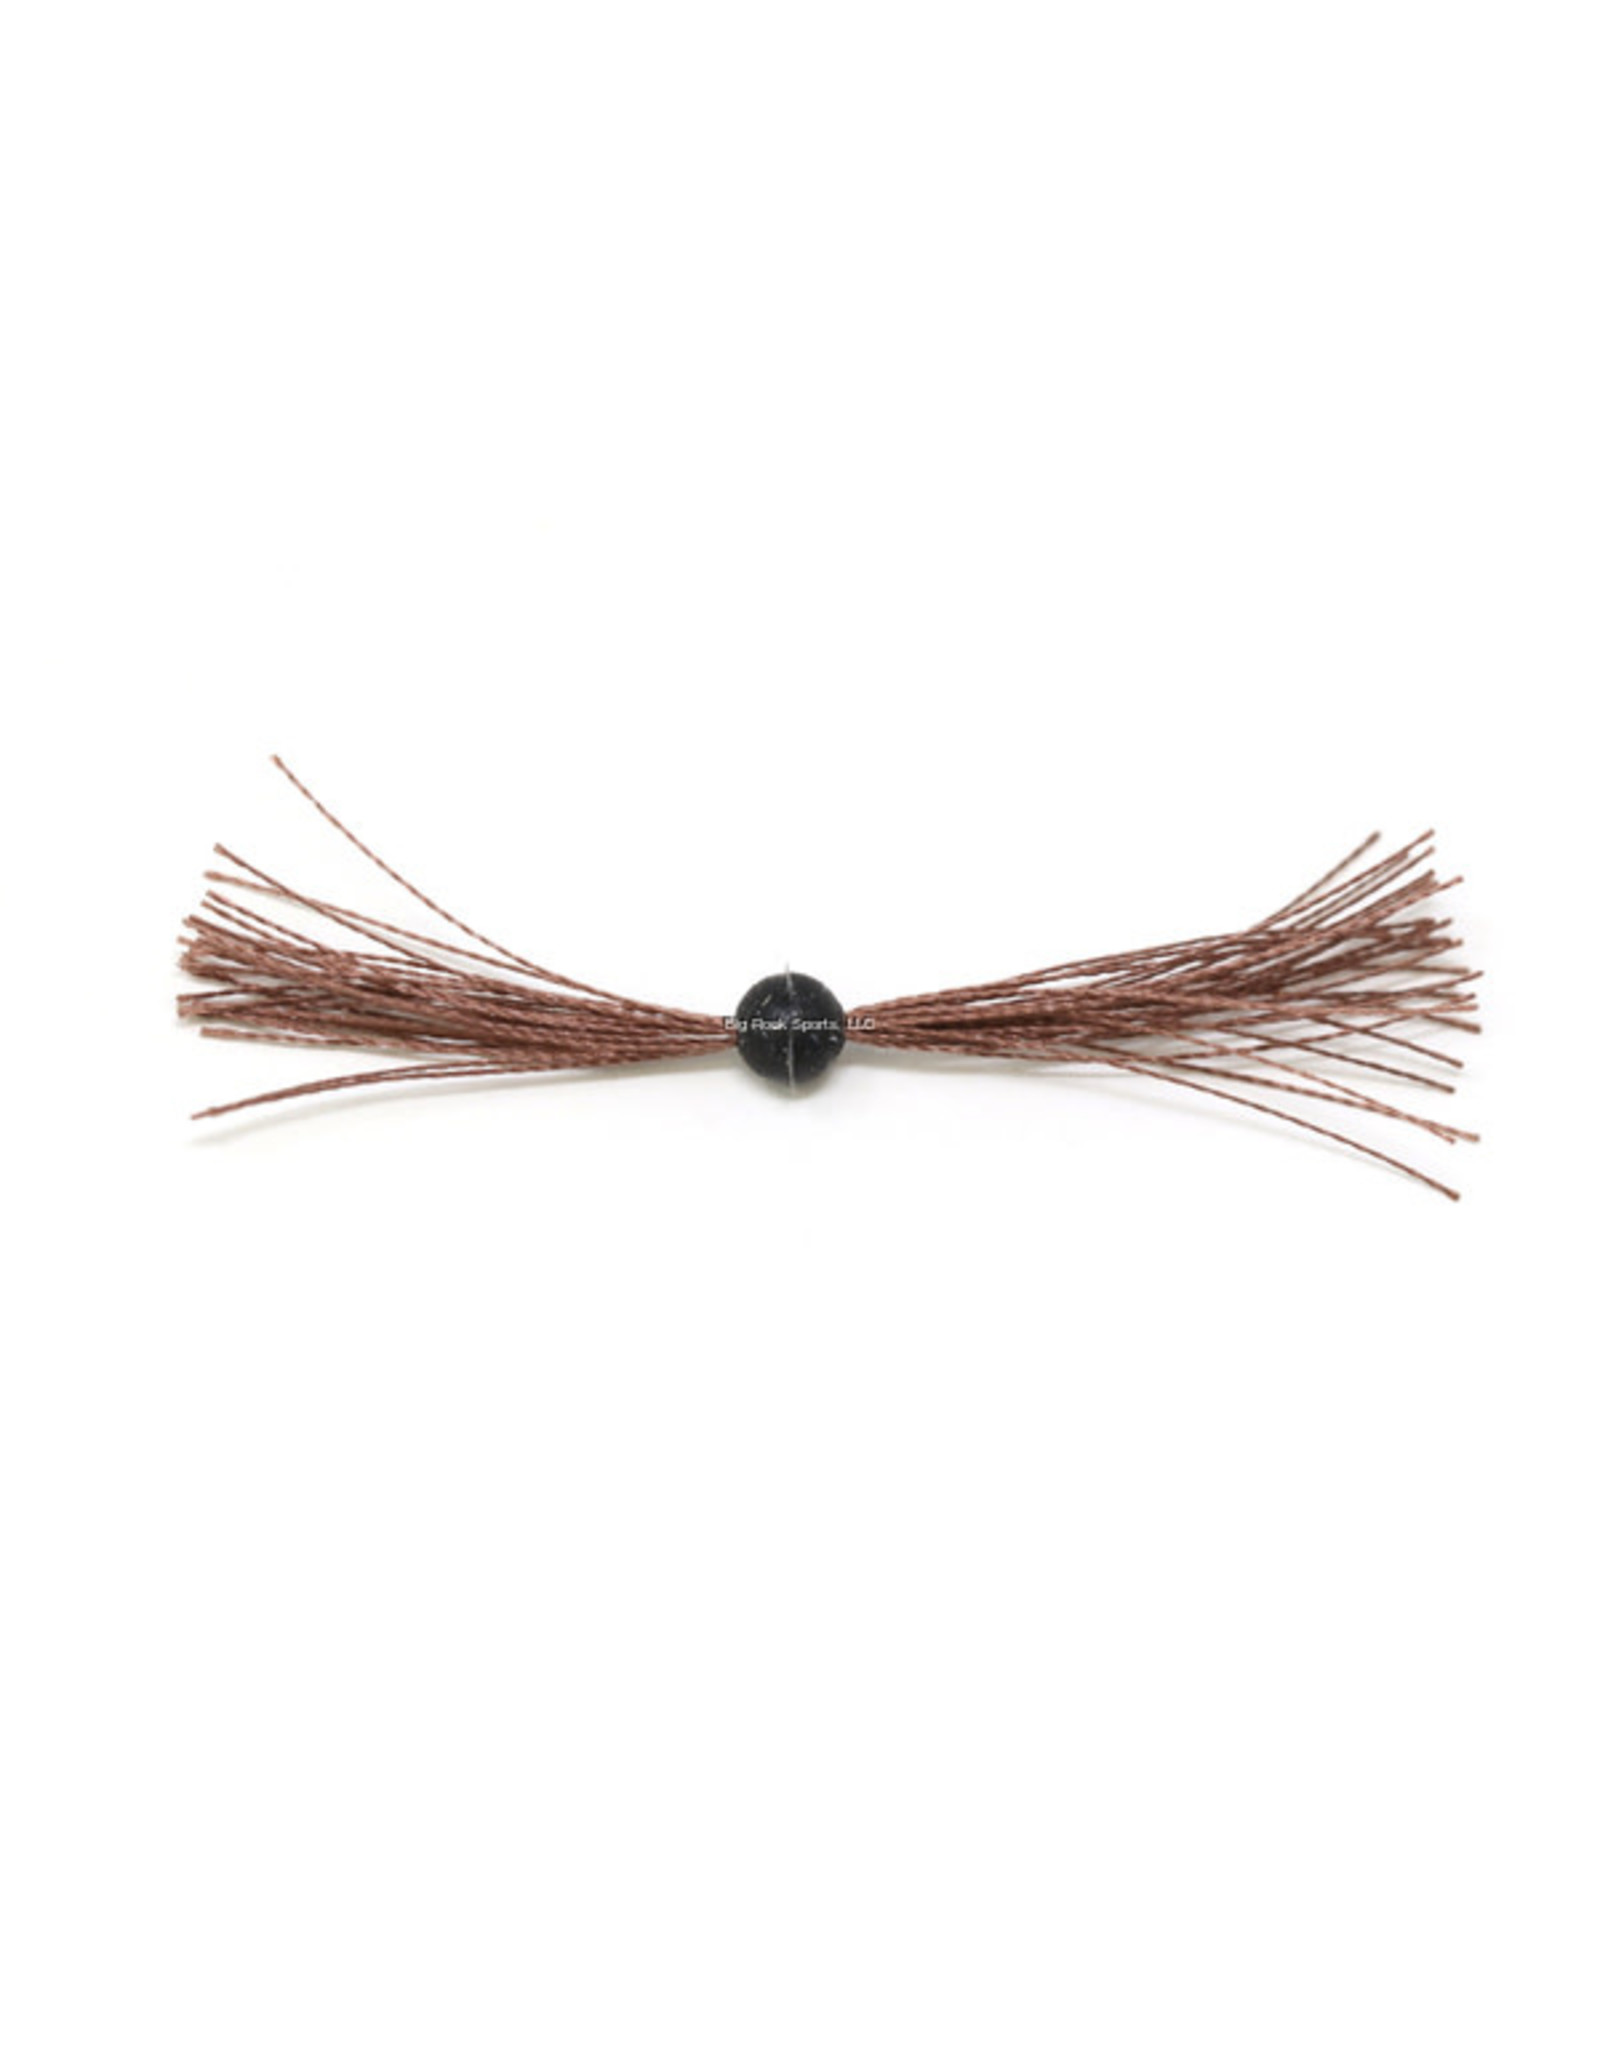 CLAM Clam 15628 Silkie Jig Trailer, 1 1/2", Natural Brown